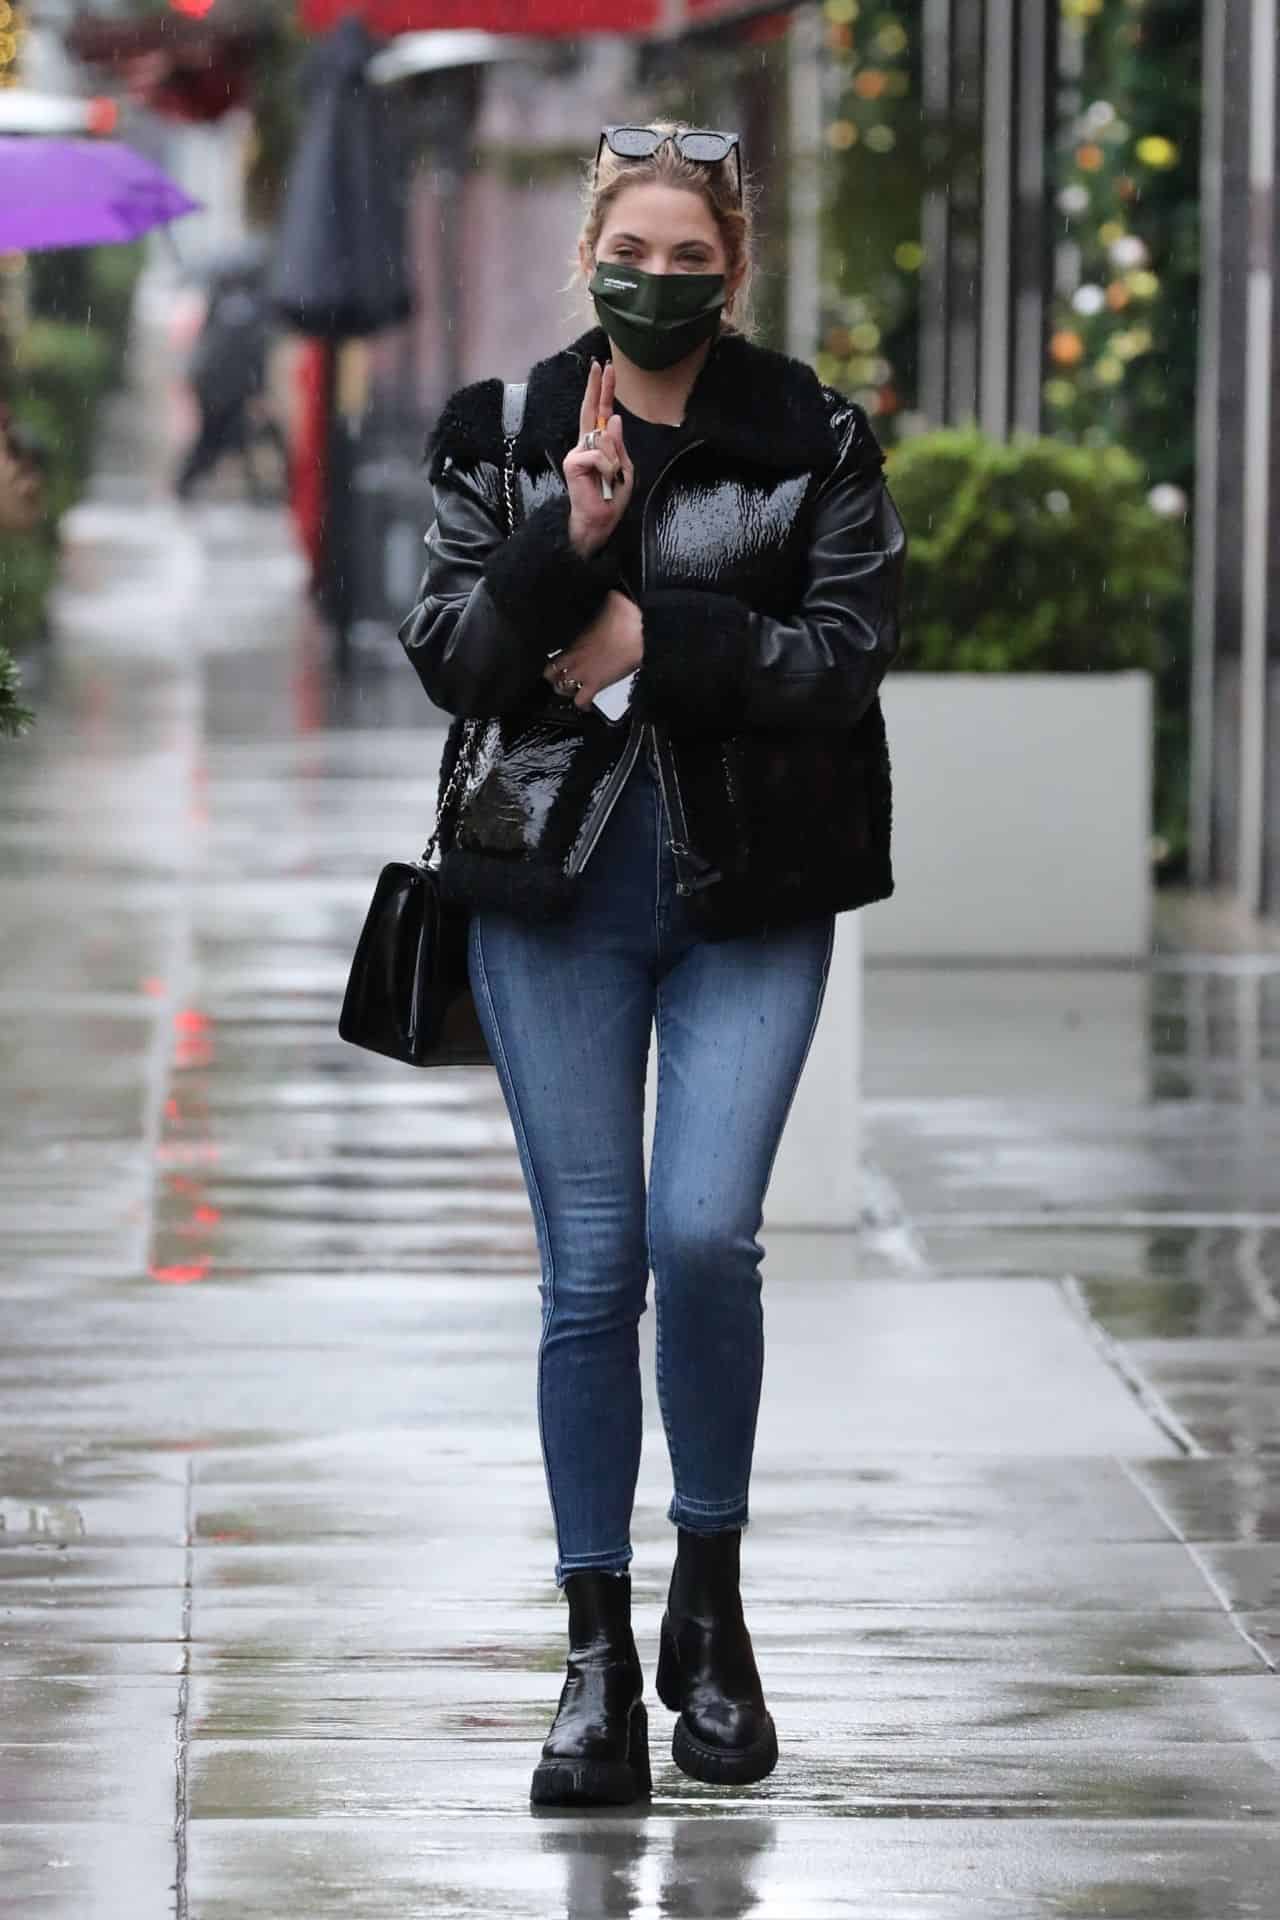 Ashley Benson Running Errands in Beverly Hills on a Rainy Day